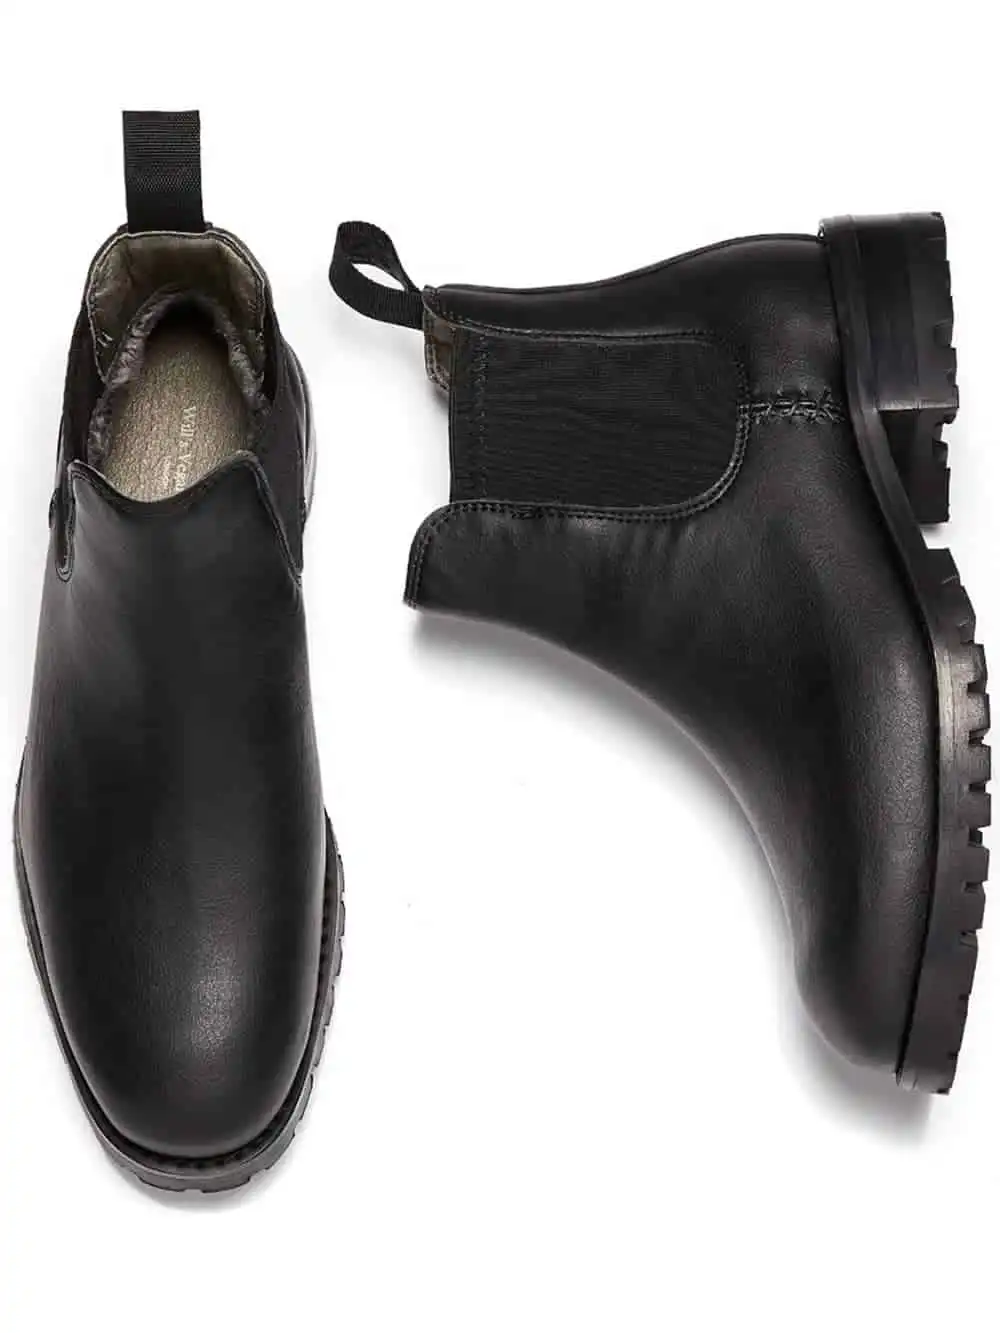 Will's insulated waterproof Chelsea boots